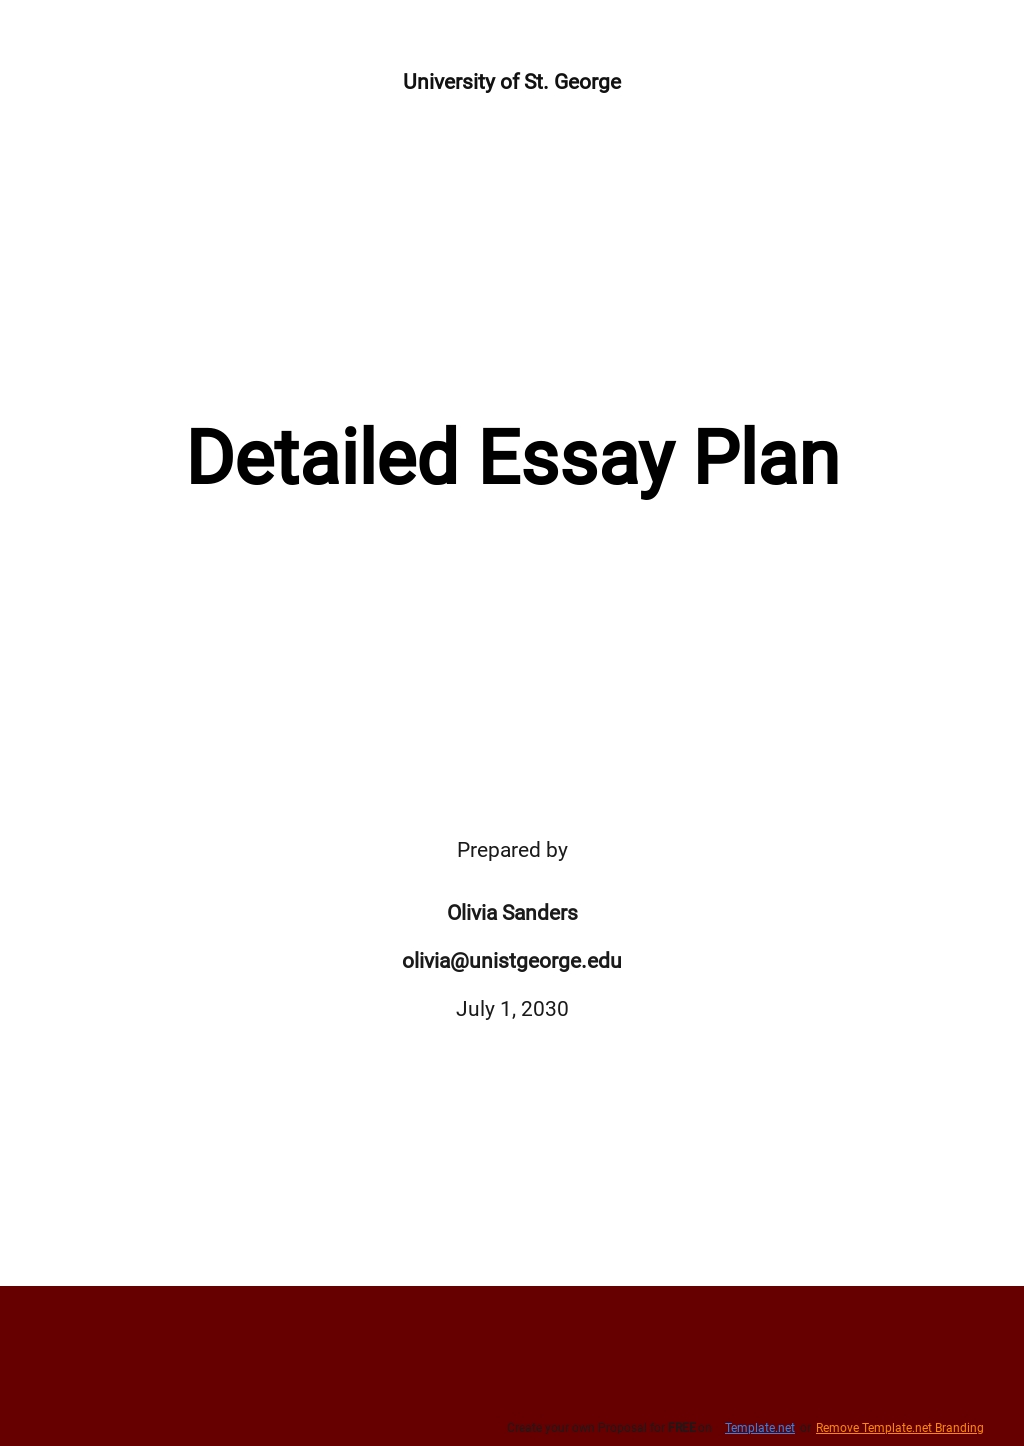 research essay plan template